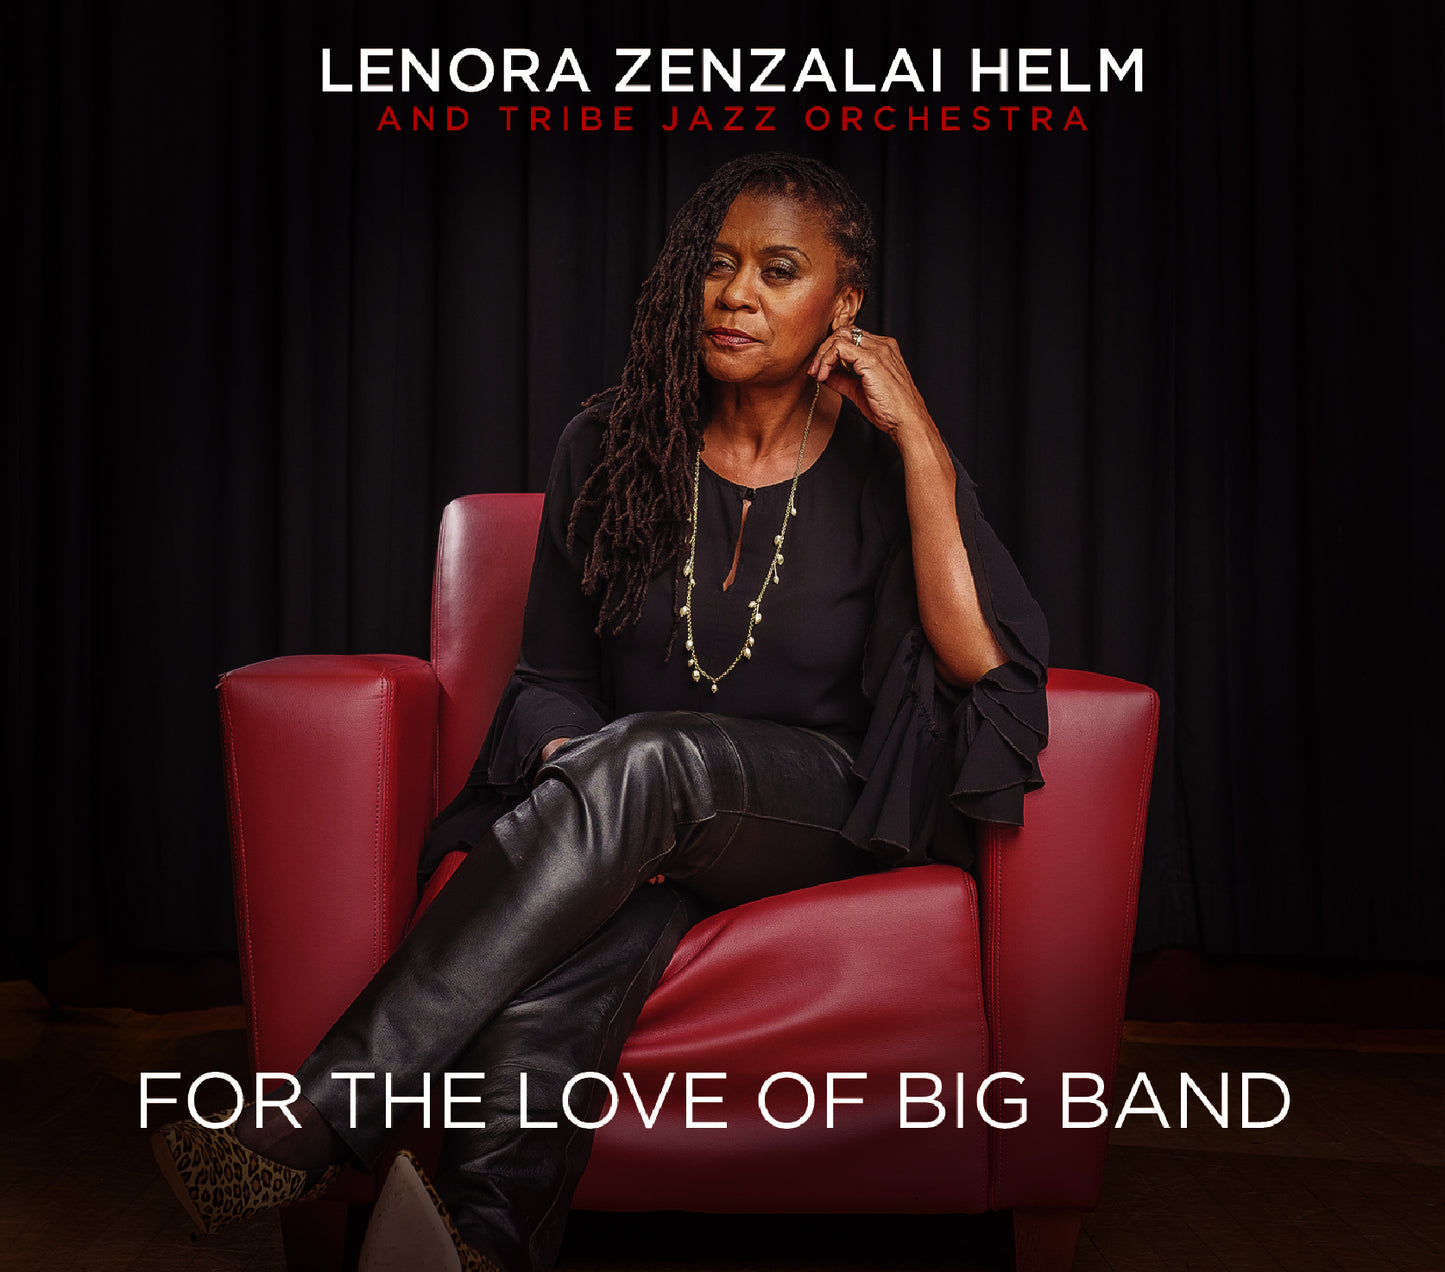 For the Love of Big Band Download of CD